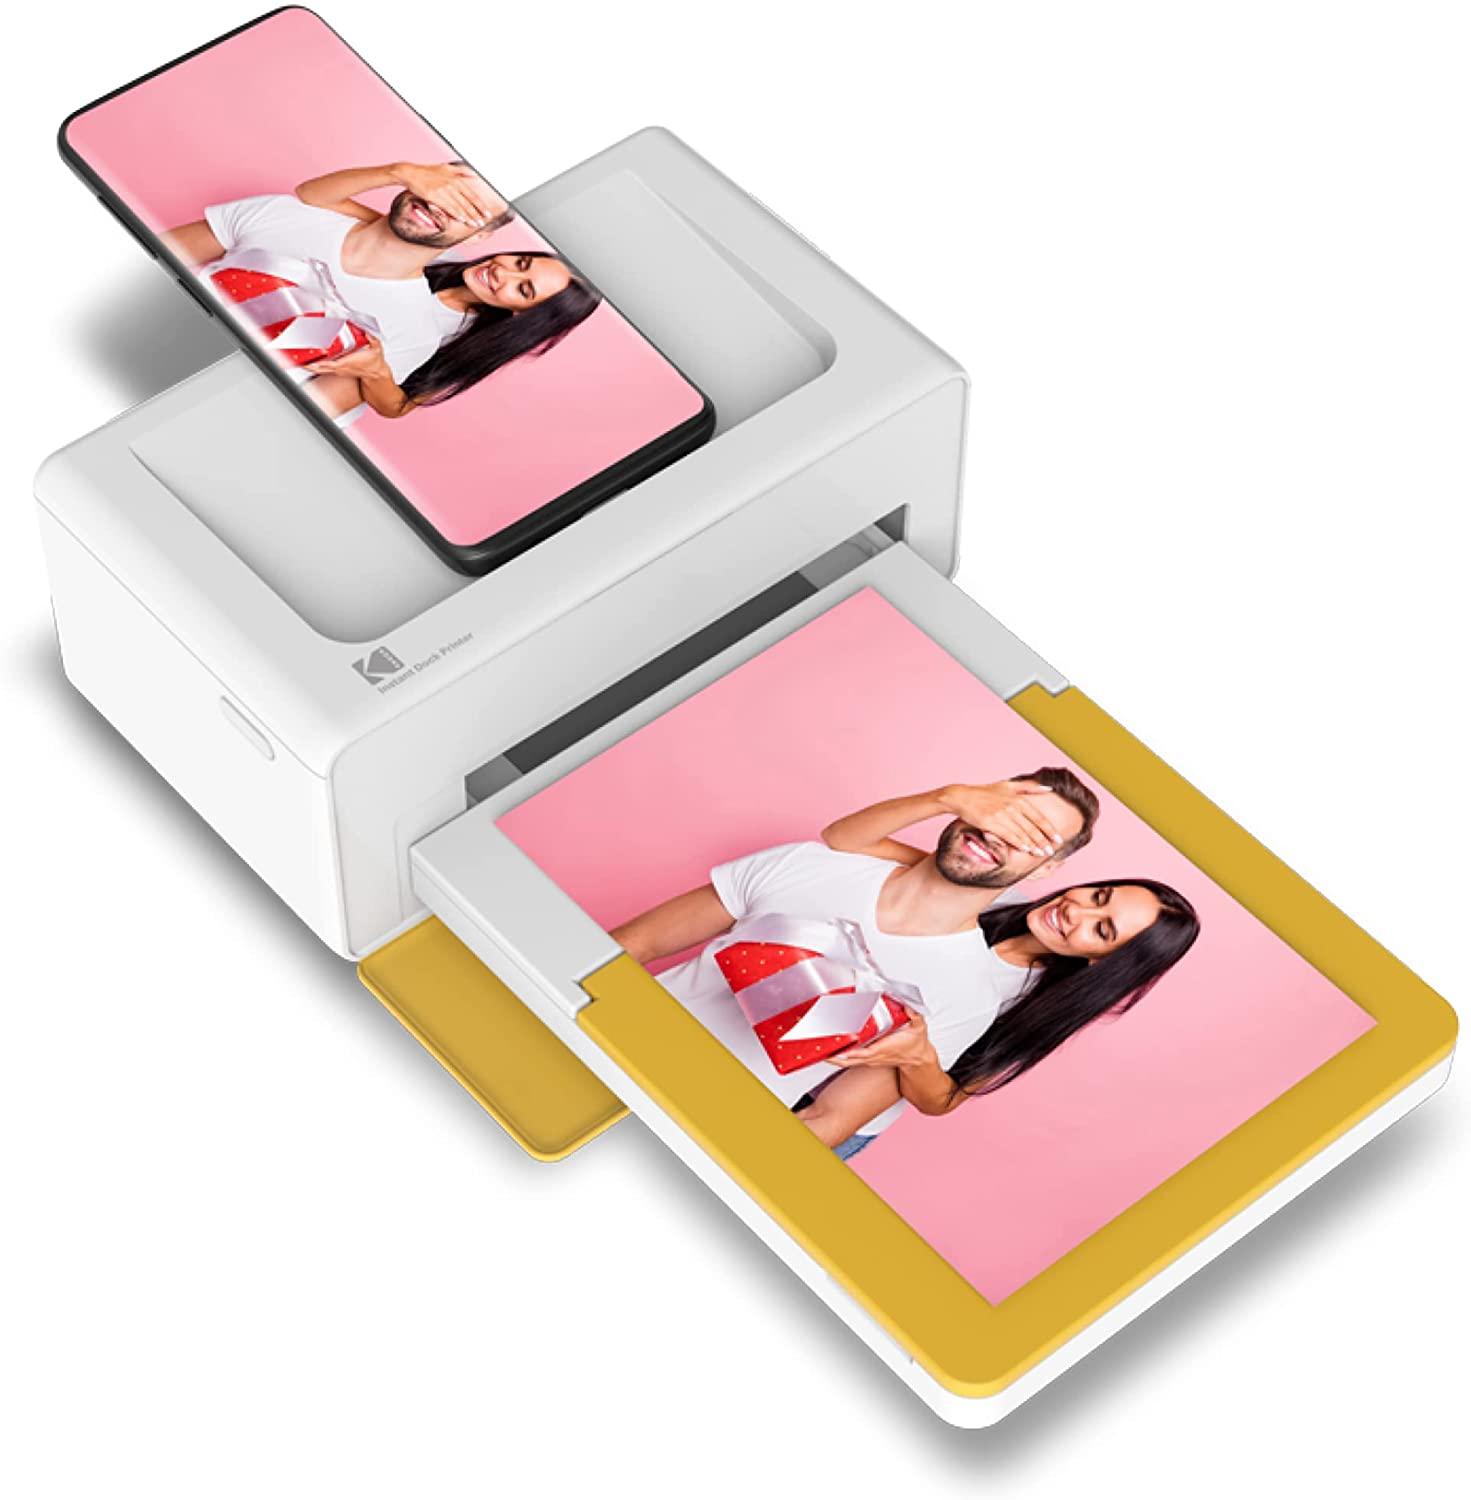 Image of Portable Instant Photo Printer